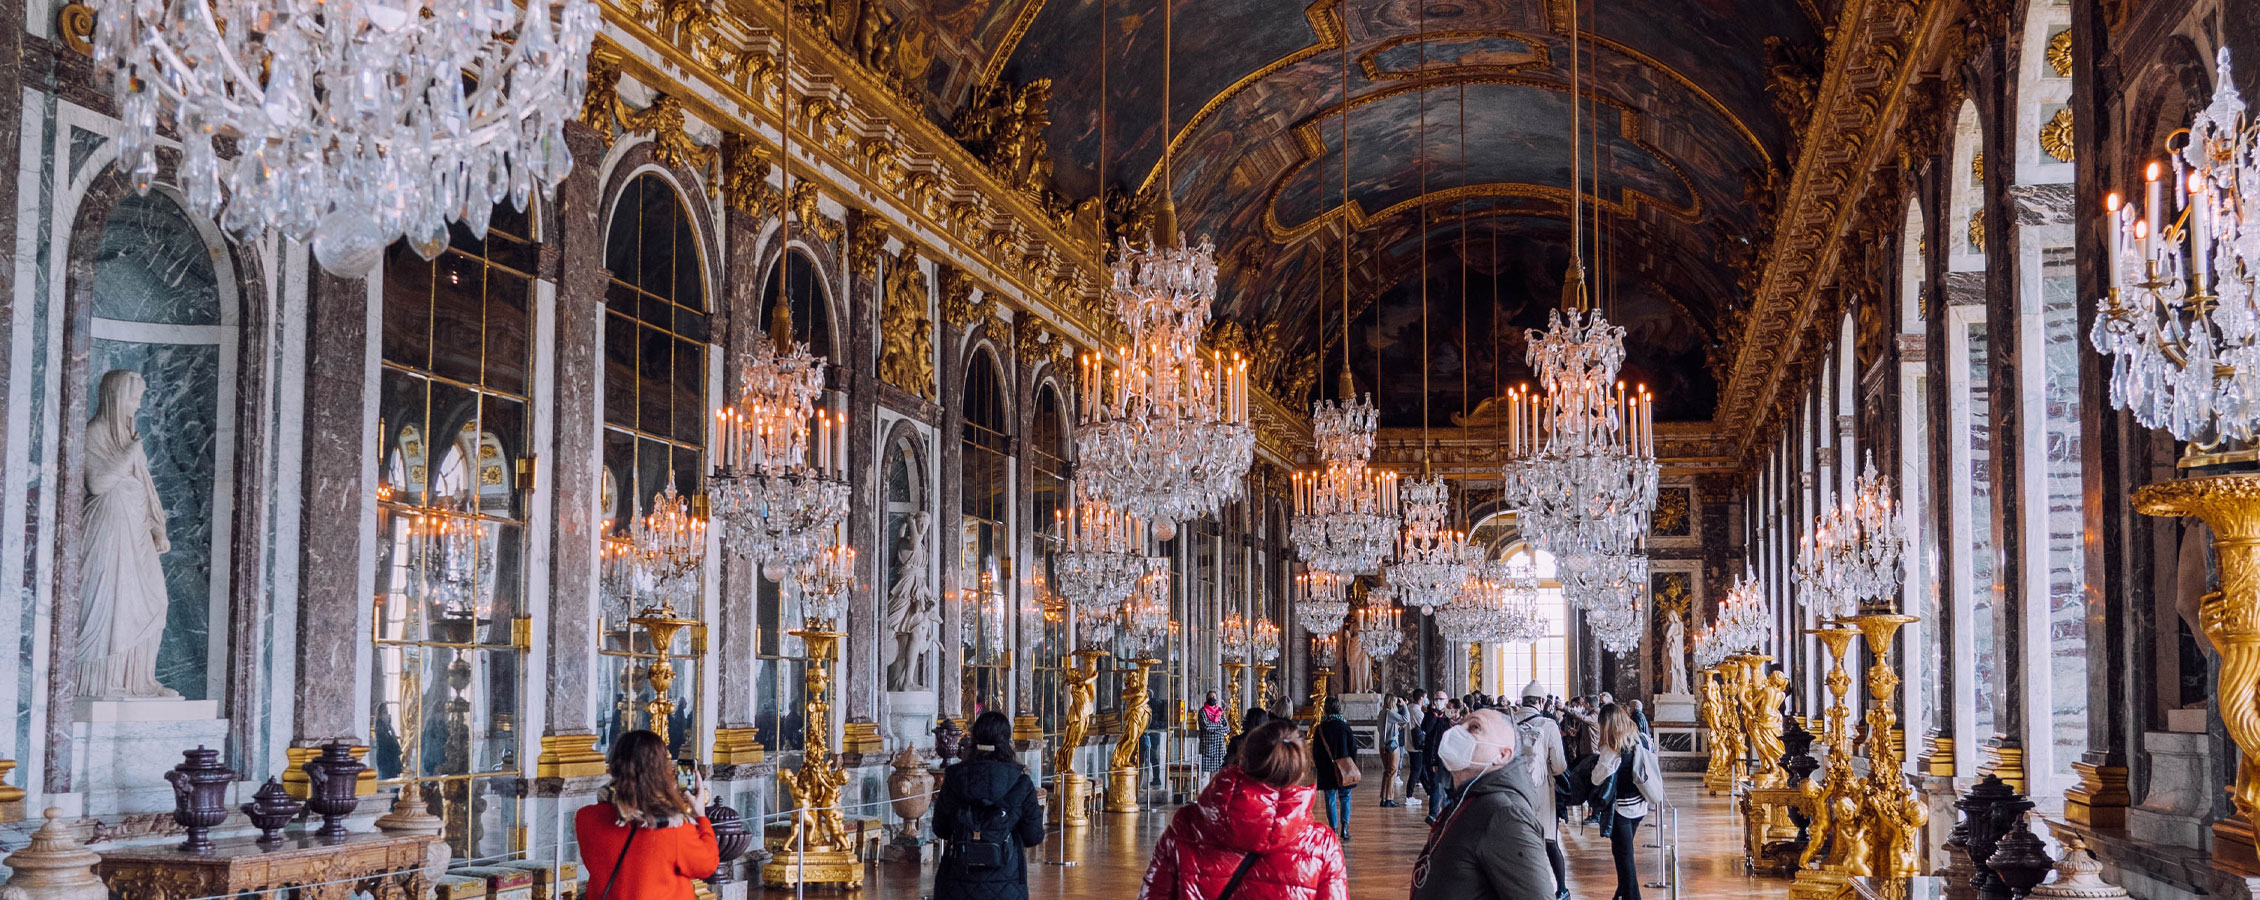 The Hall of Mirrors in the Castle of Versailles.